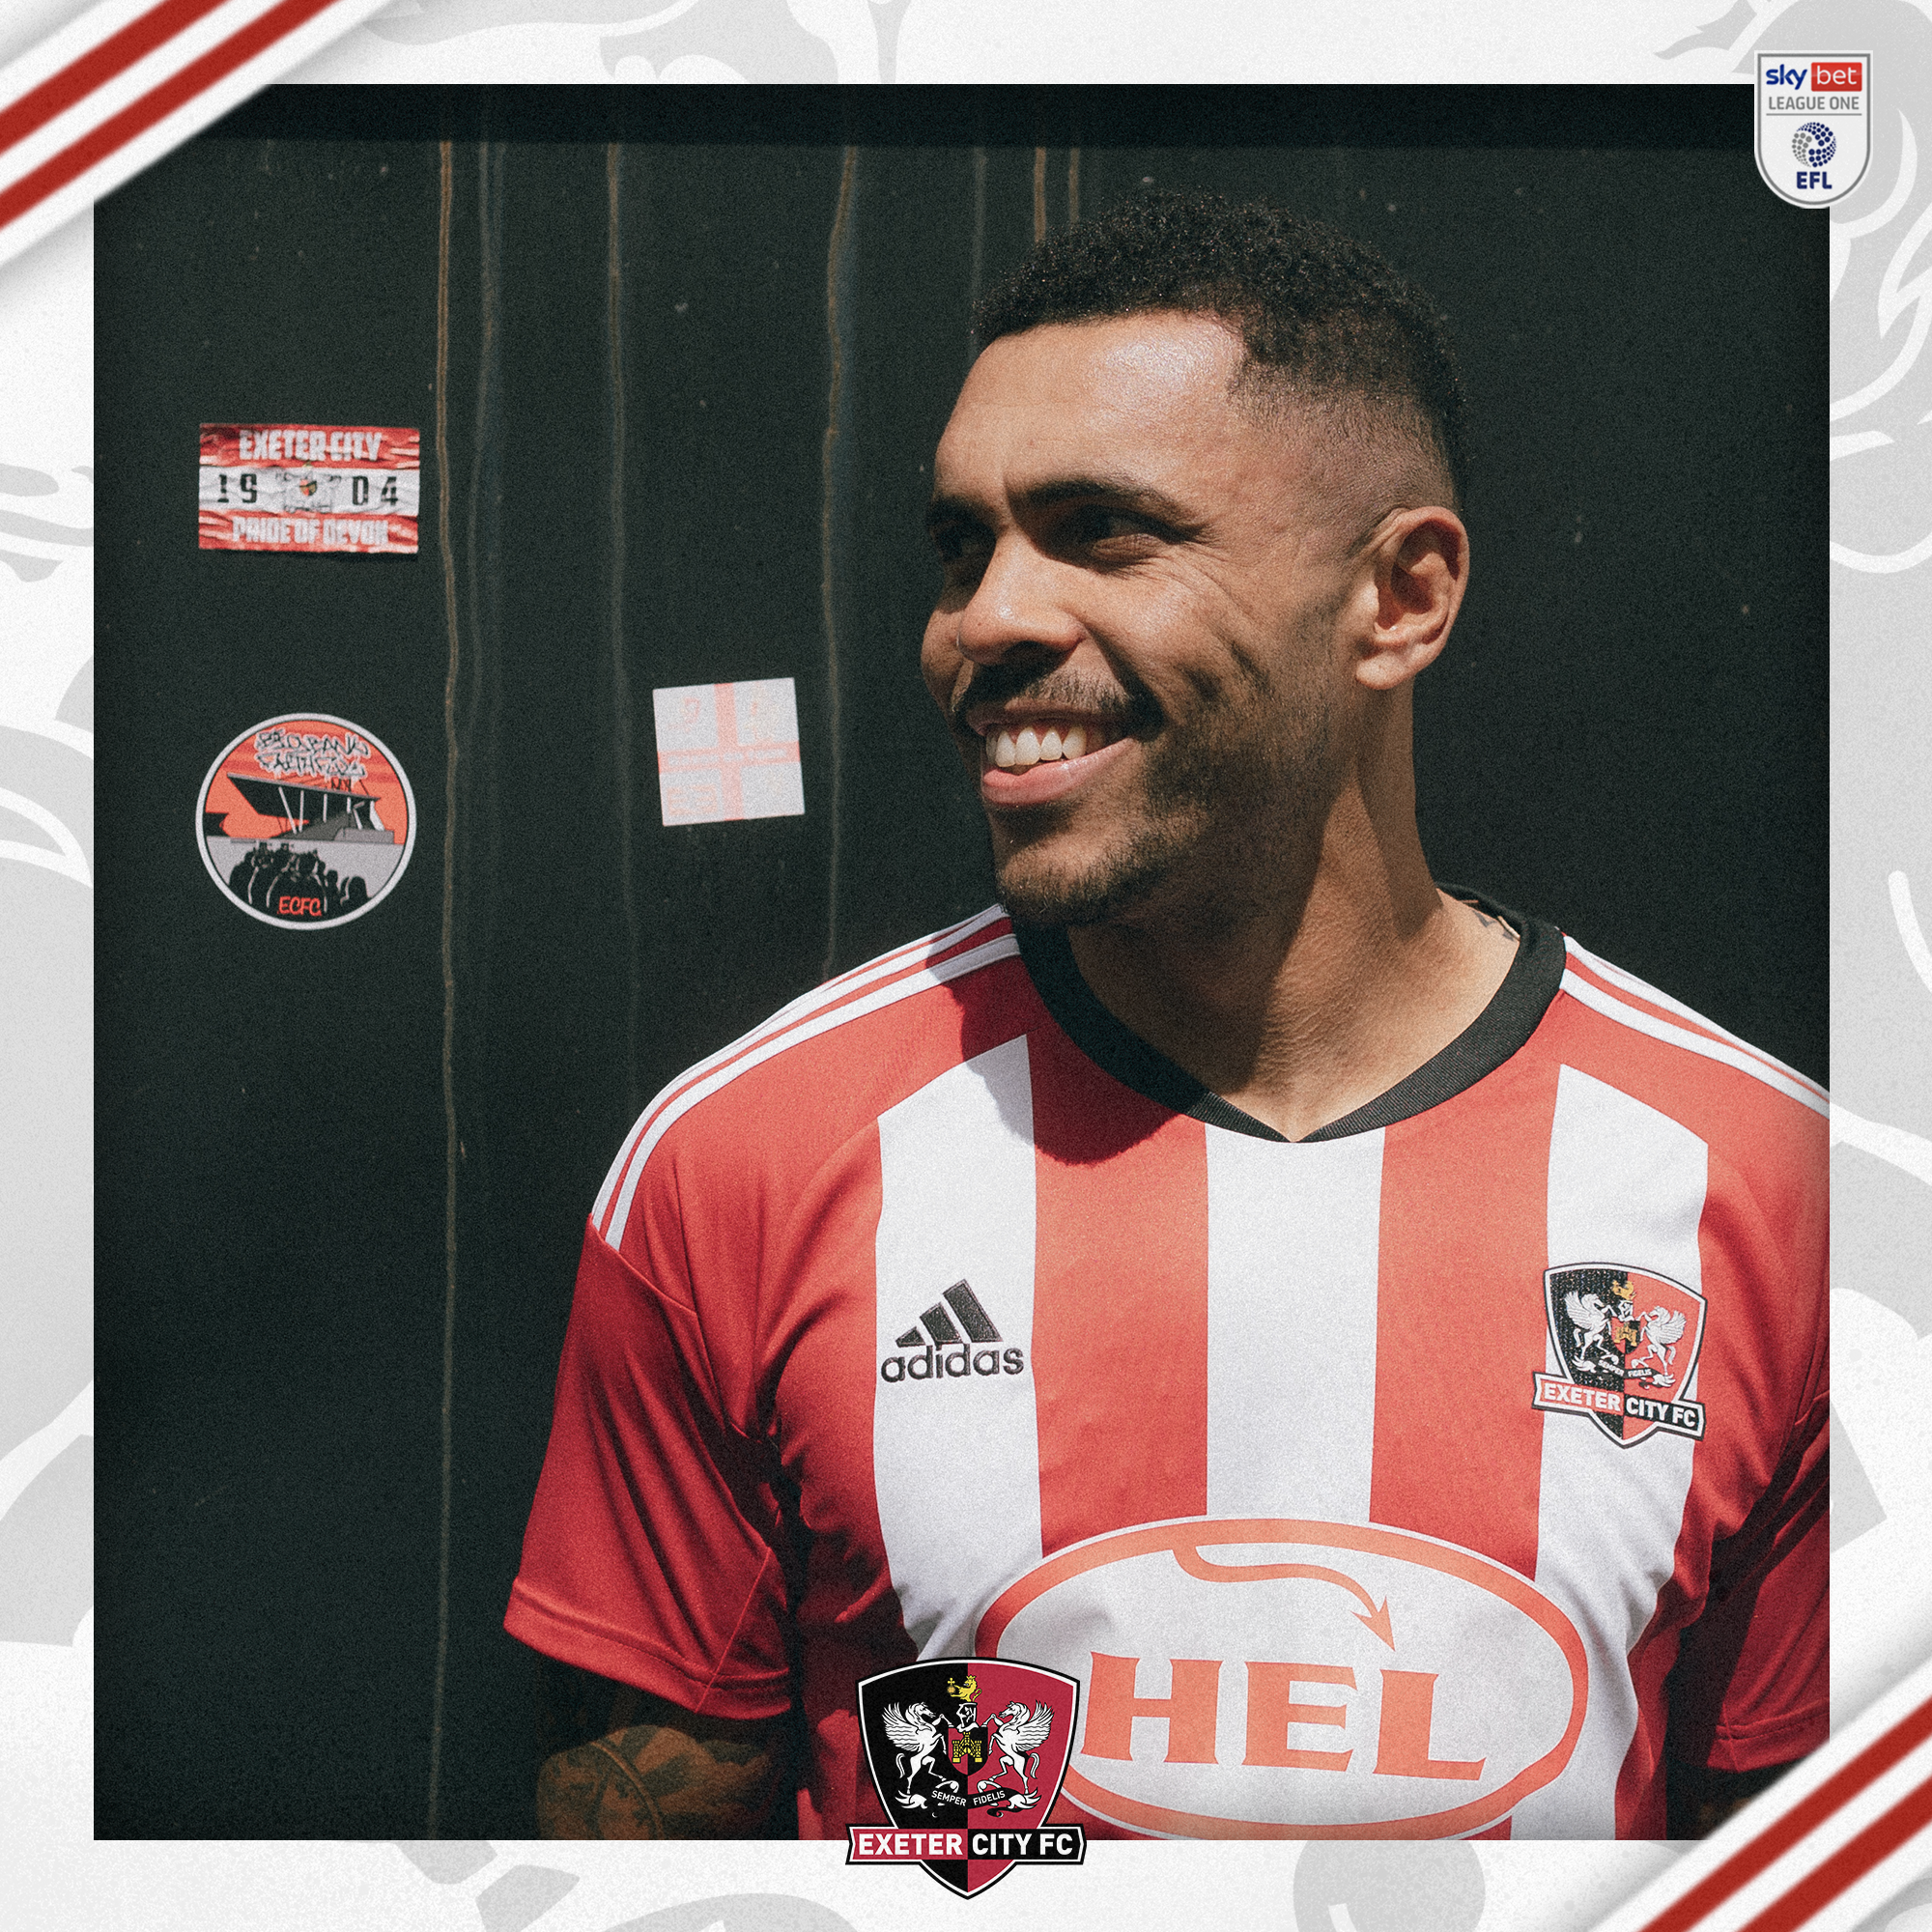 Josh Magennis in Exeter kit leaning against a black gate, looking to his right